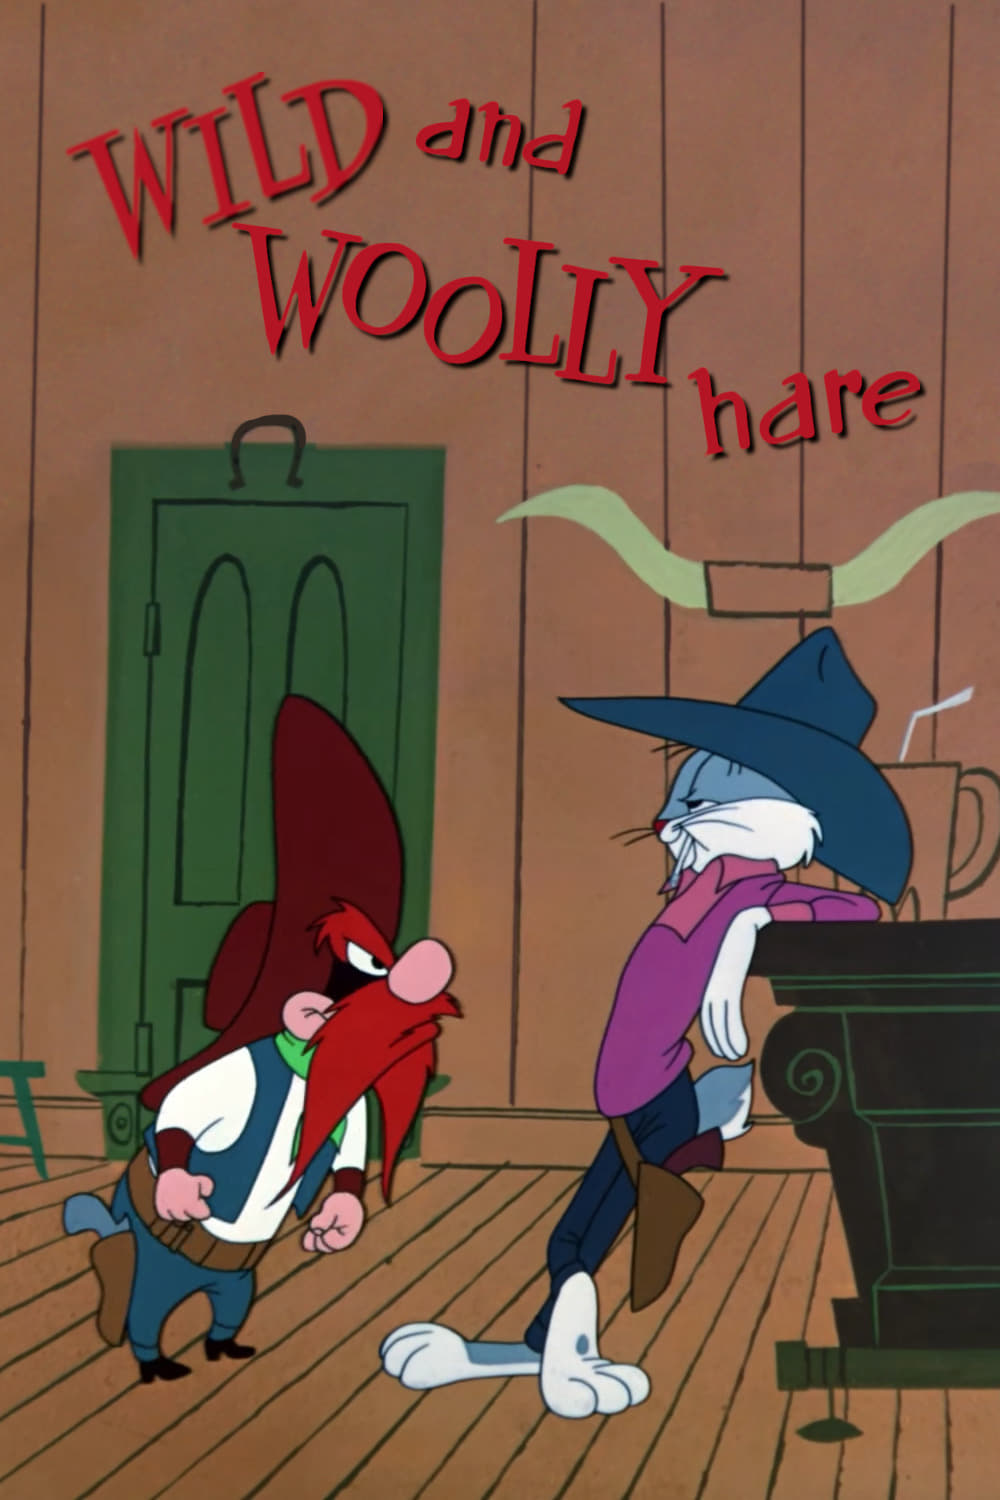 Wild and Woolly Hare (1959)